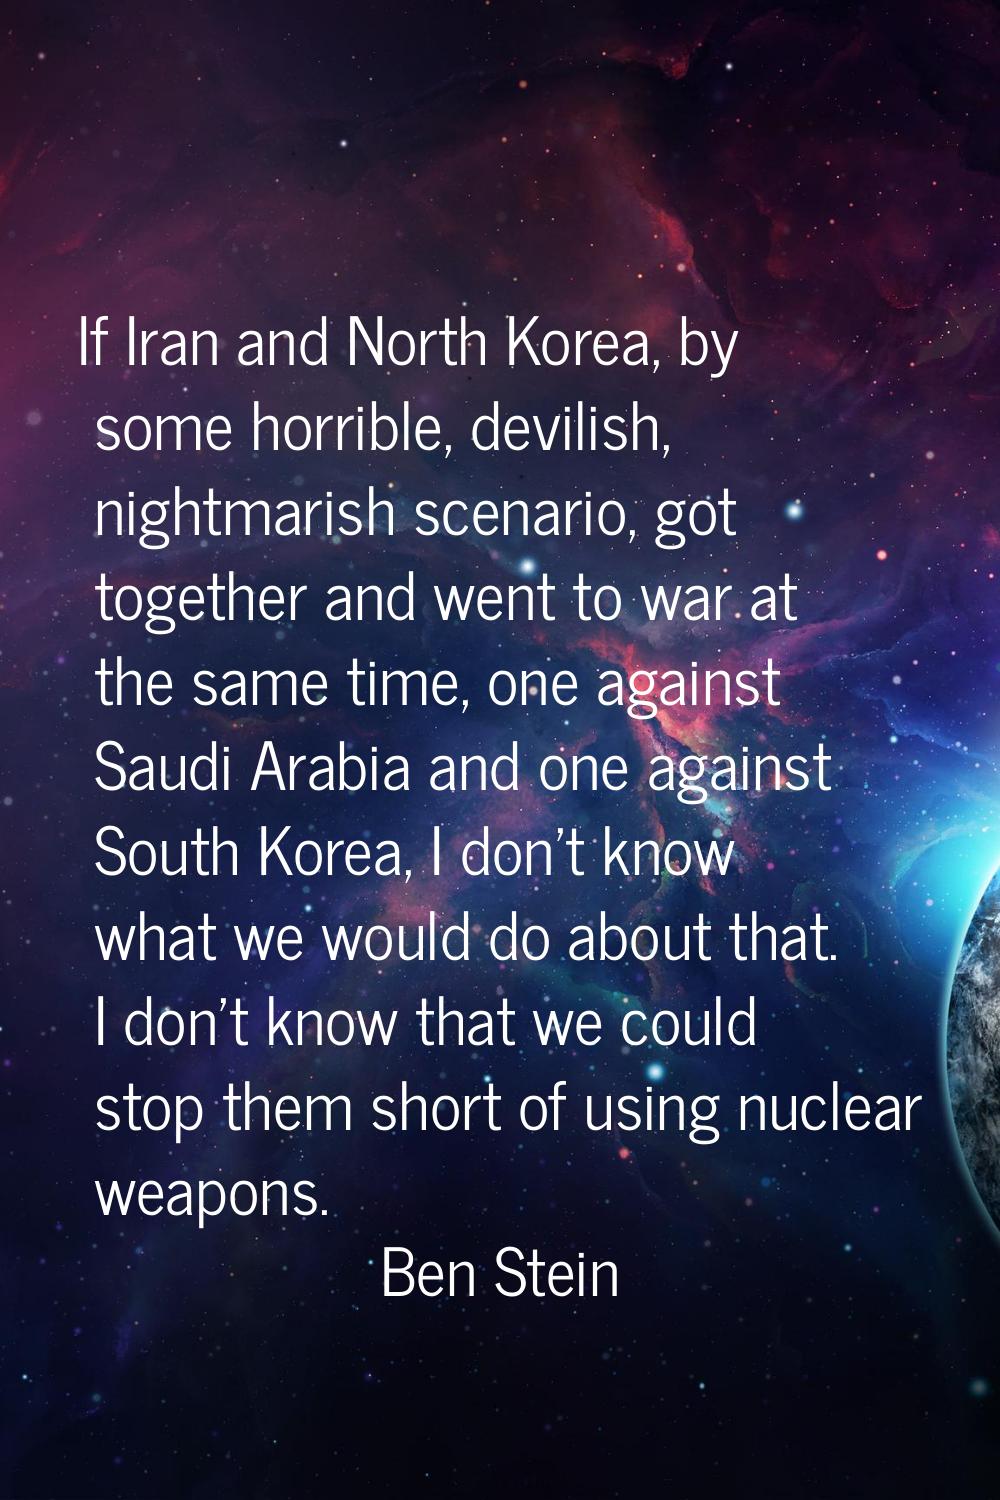 If Iran and North Korea, by some horrible, devilish, nightmarish scenario, got together and went to